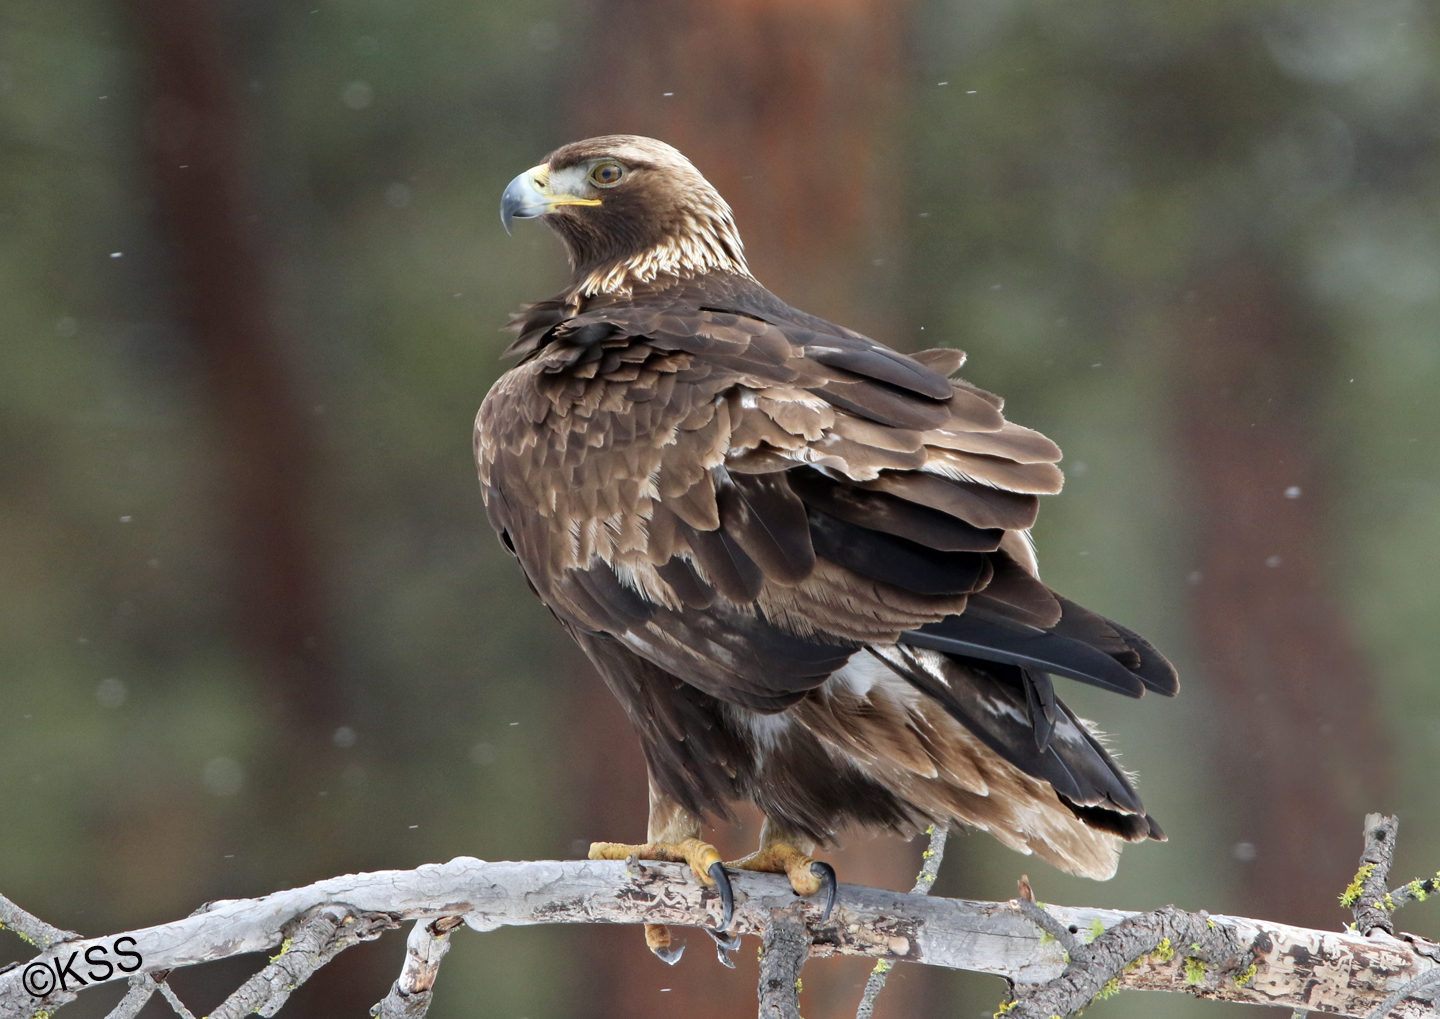 This golden eagle was the most tolerant of its kind we have ever encountered. He perched on a kill by the road, on the nearby hillside, and on a downed tree limb - offering wonderful poses.